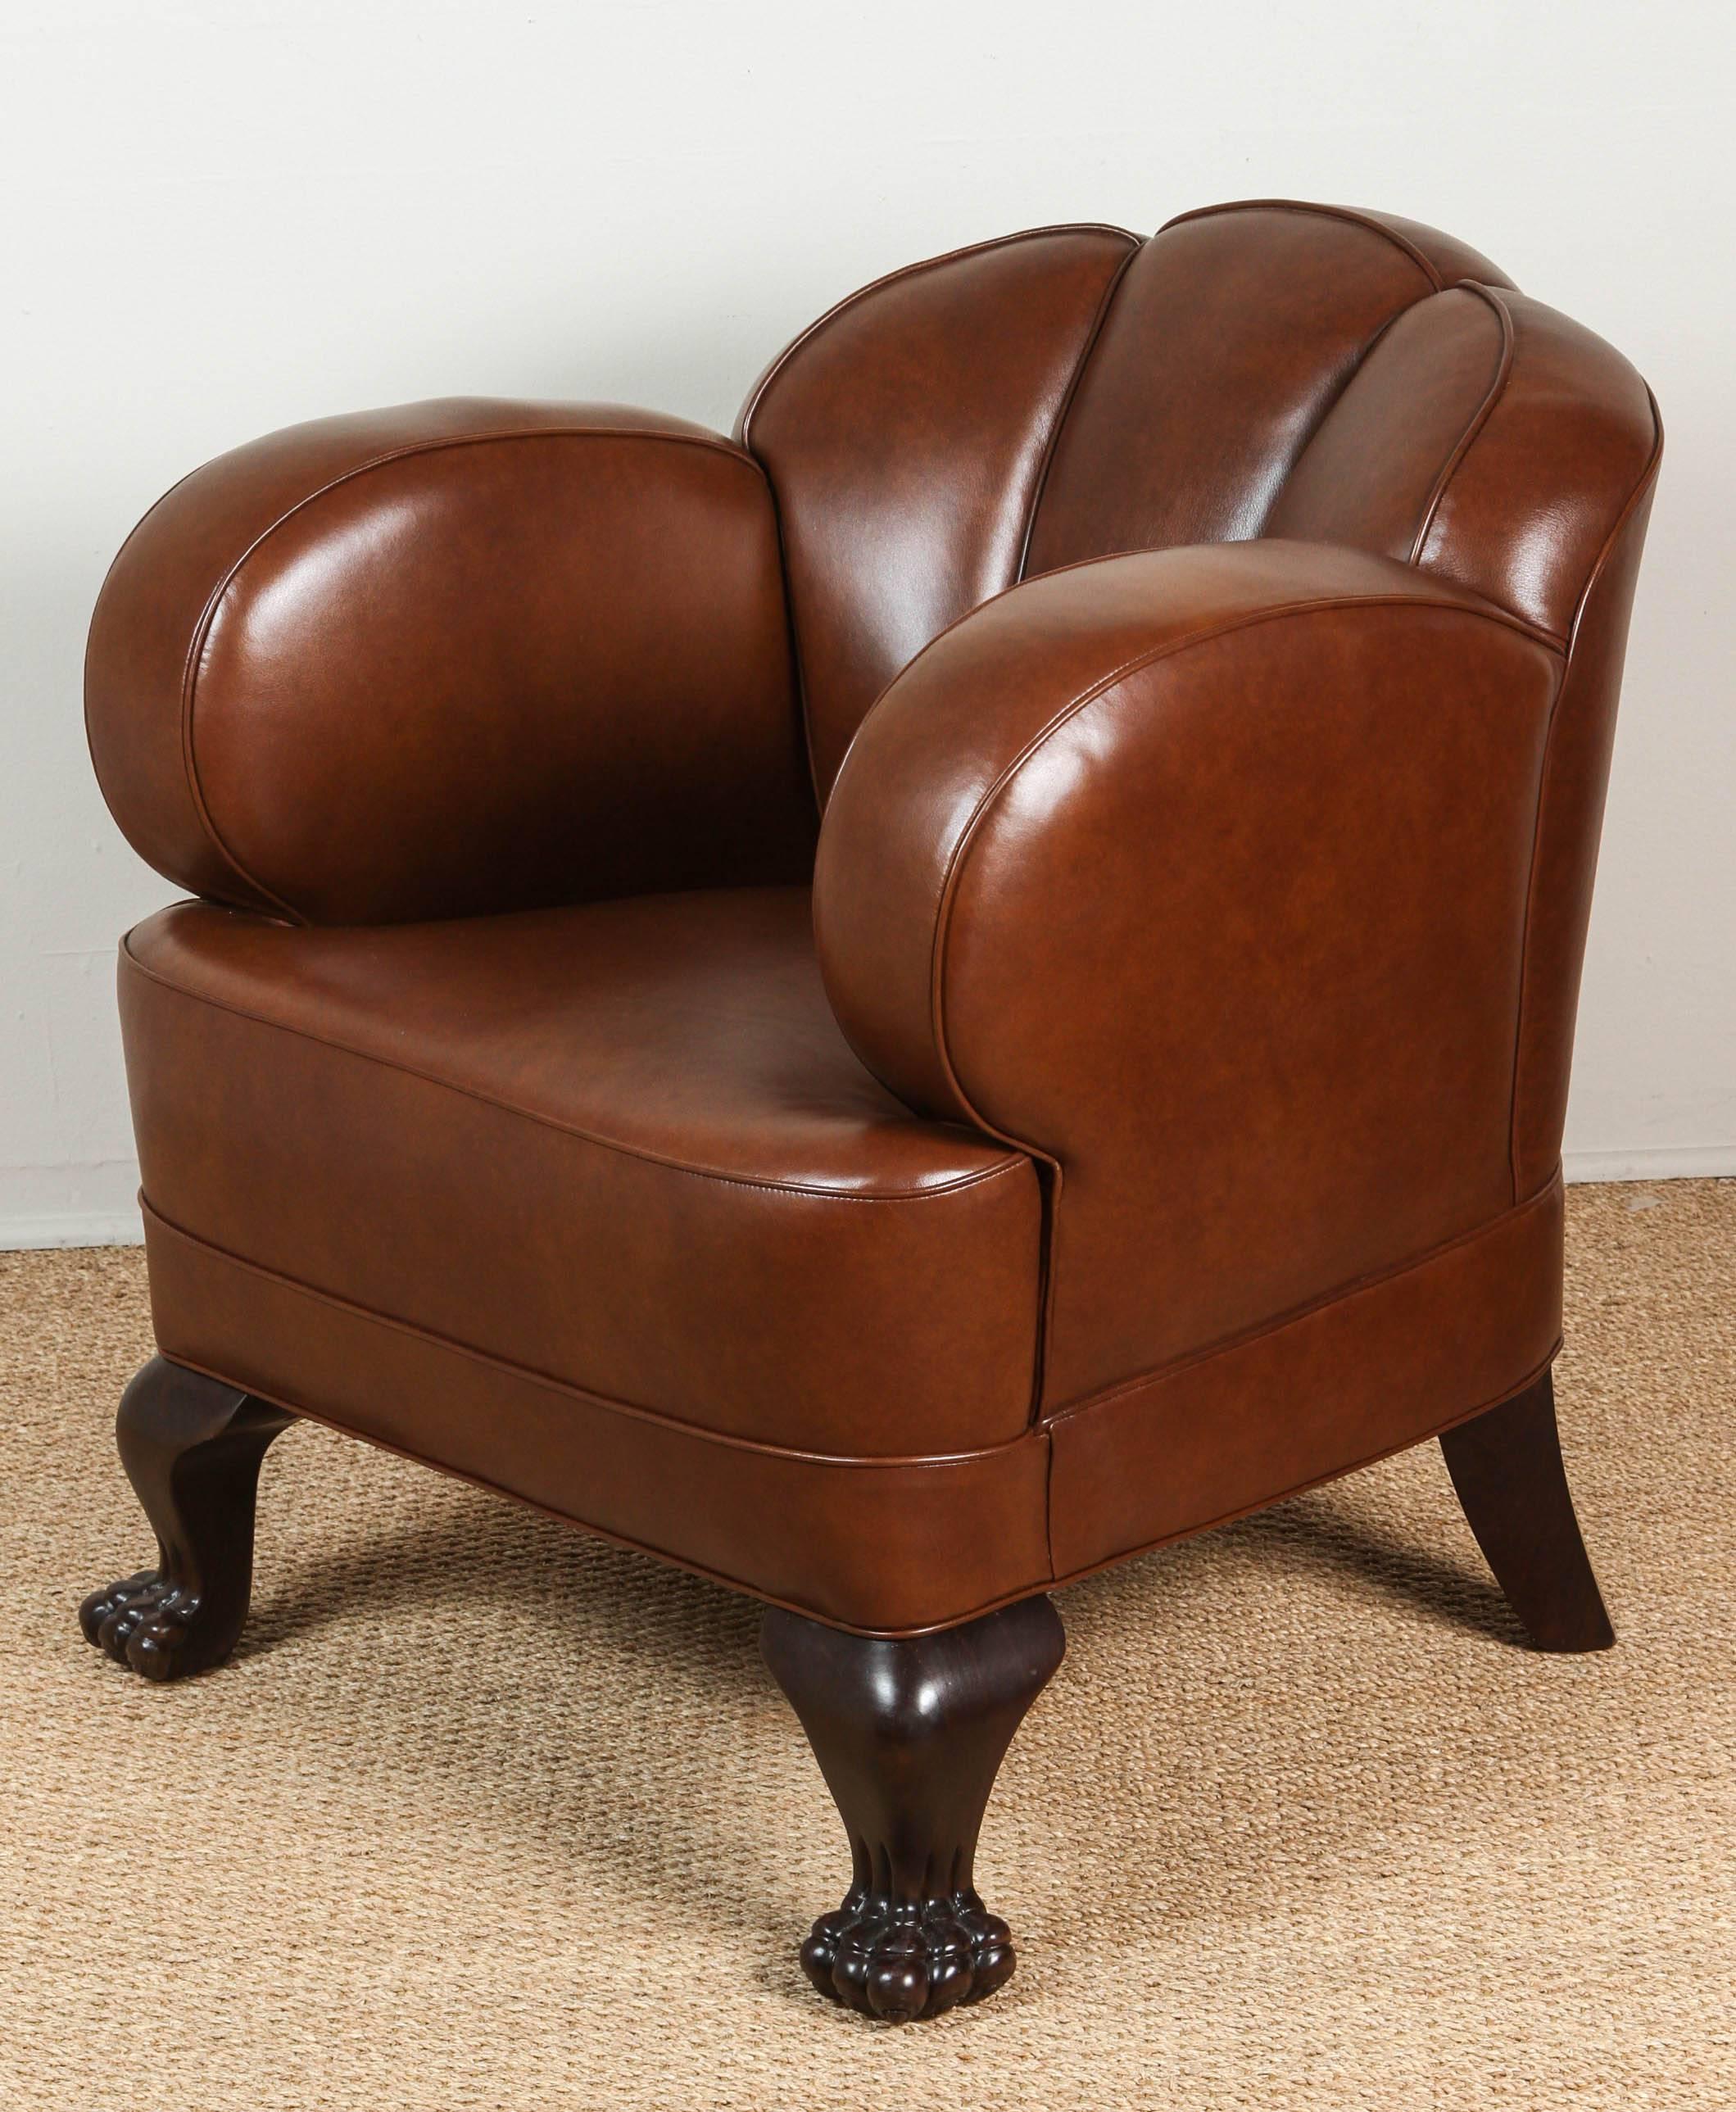 American  Workshop Leather Chairs For Sale